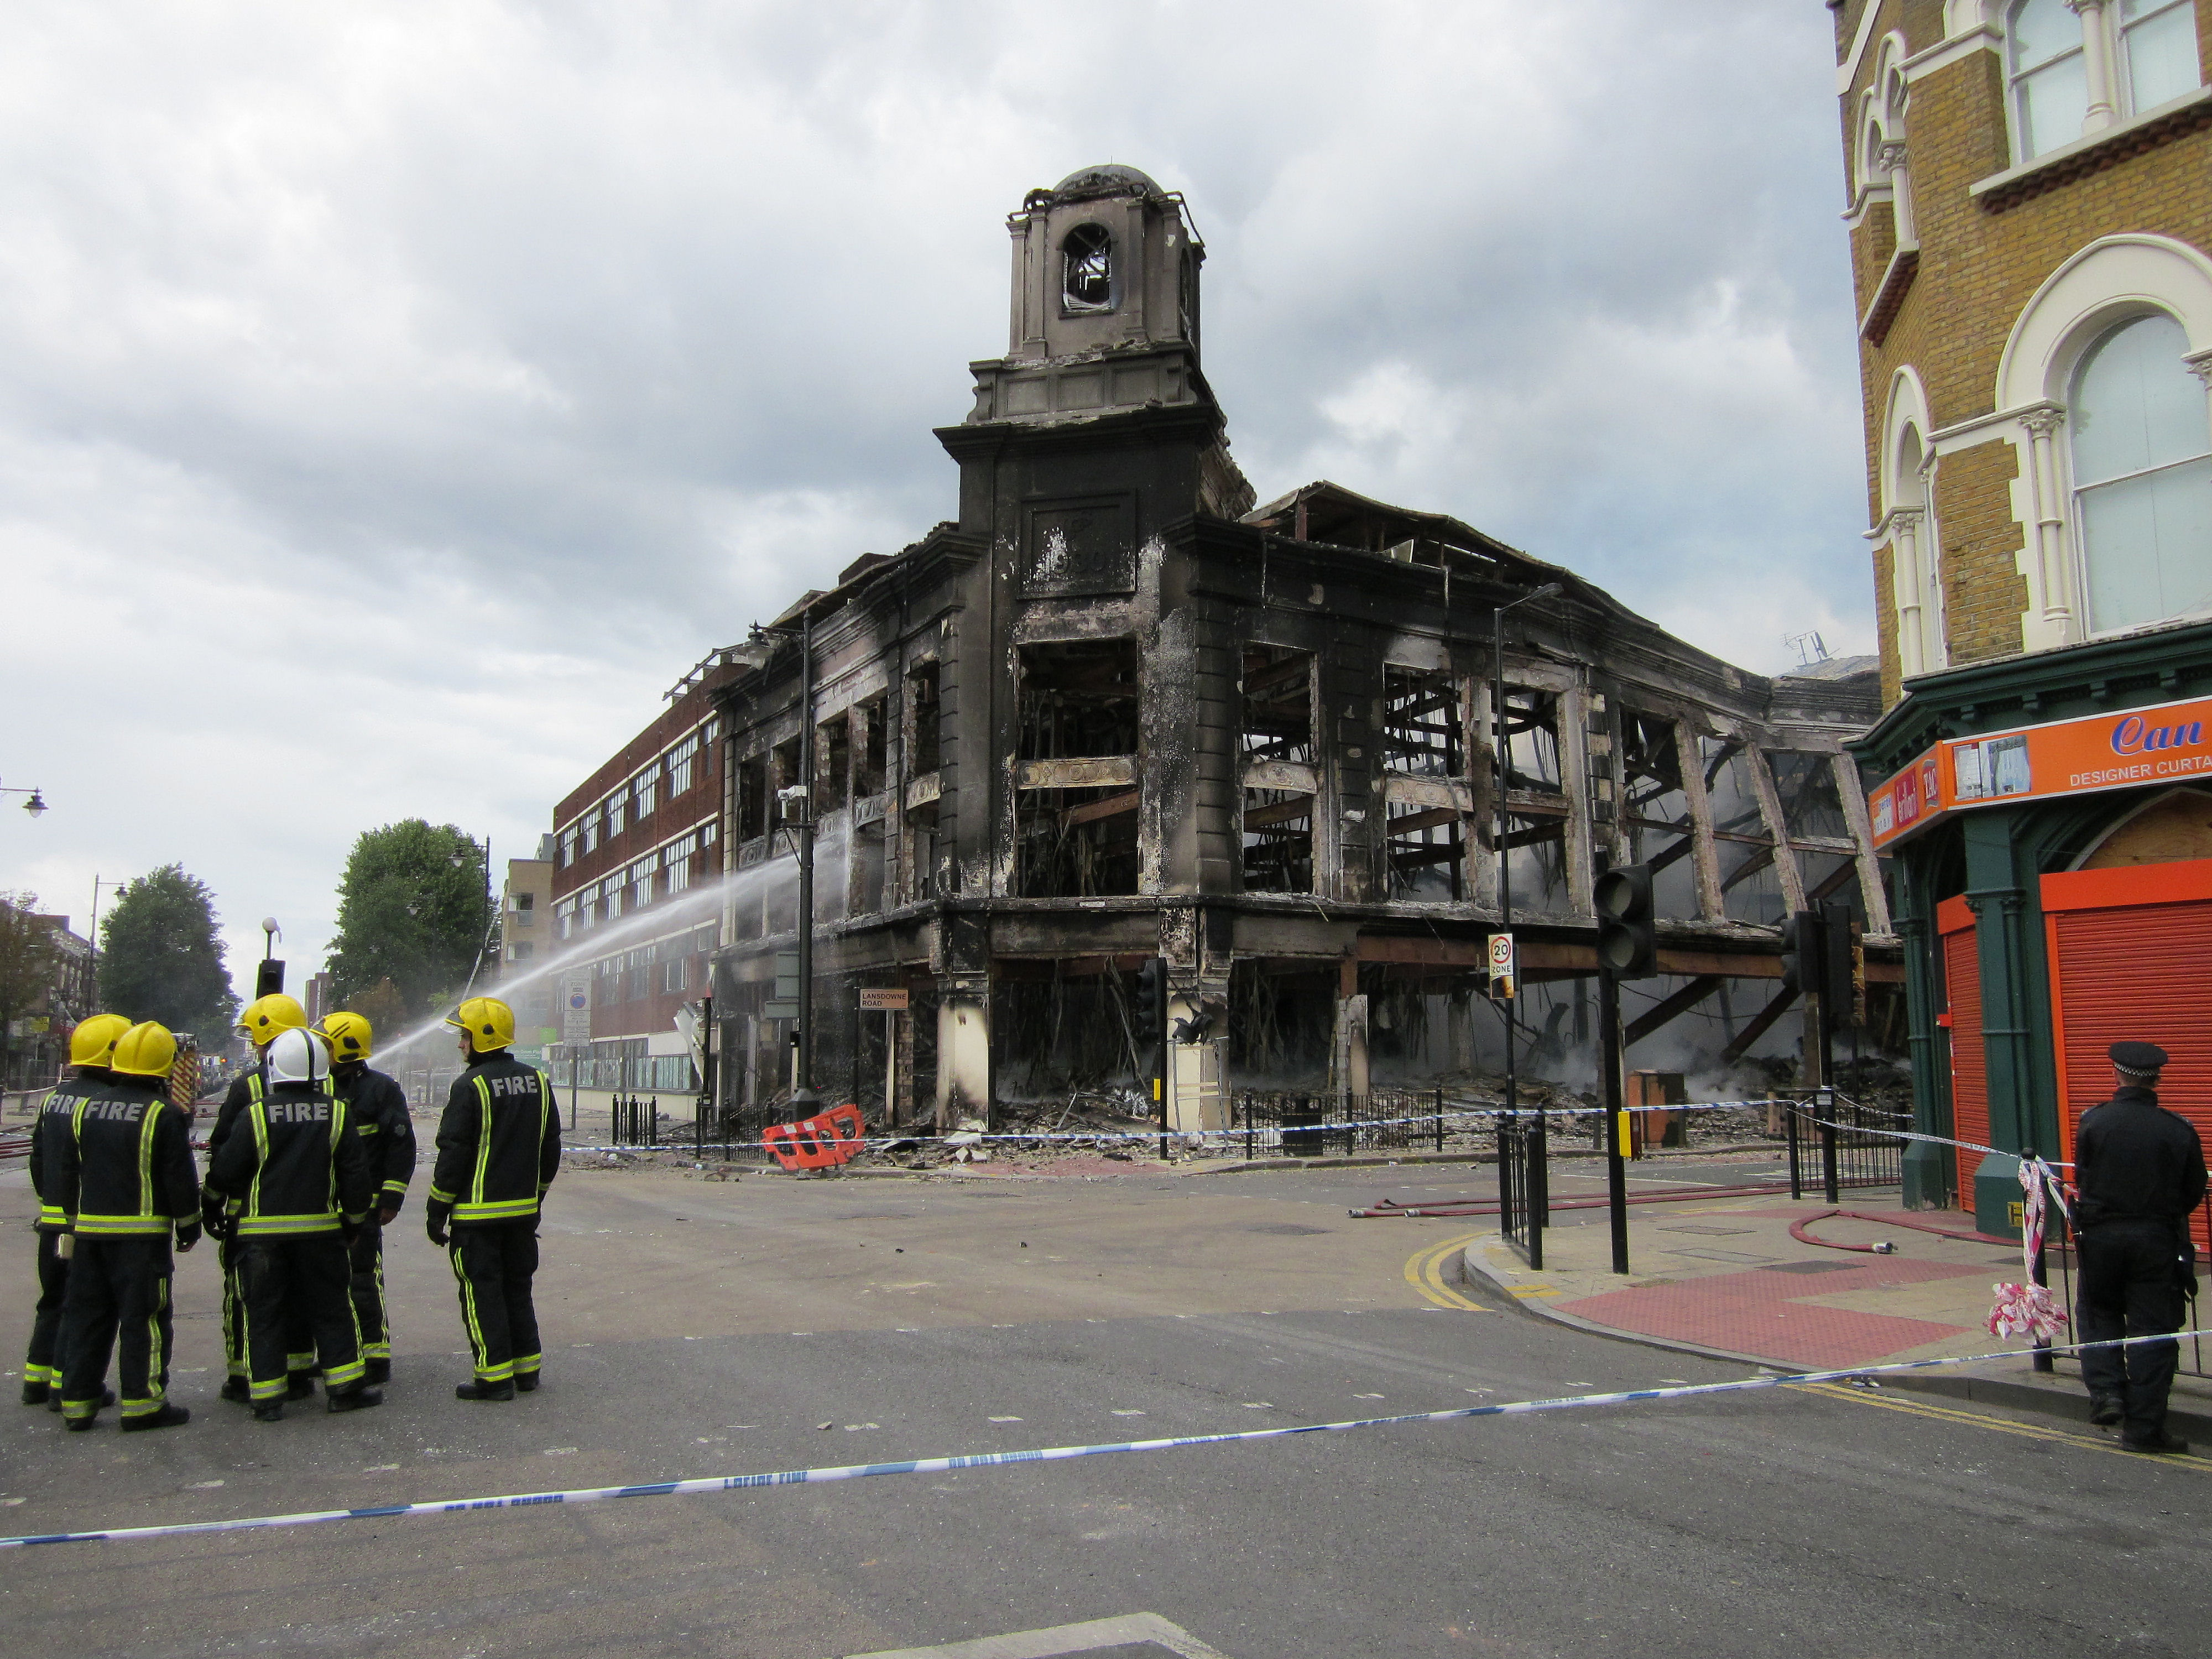 Firefighters douse a shop and flats destroyed by arson during the initial rioting in 2011 in Tottenham, London